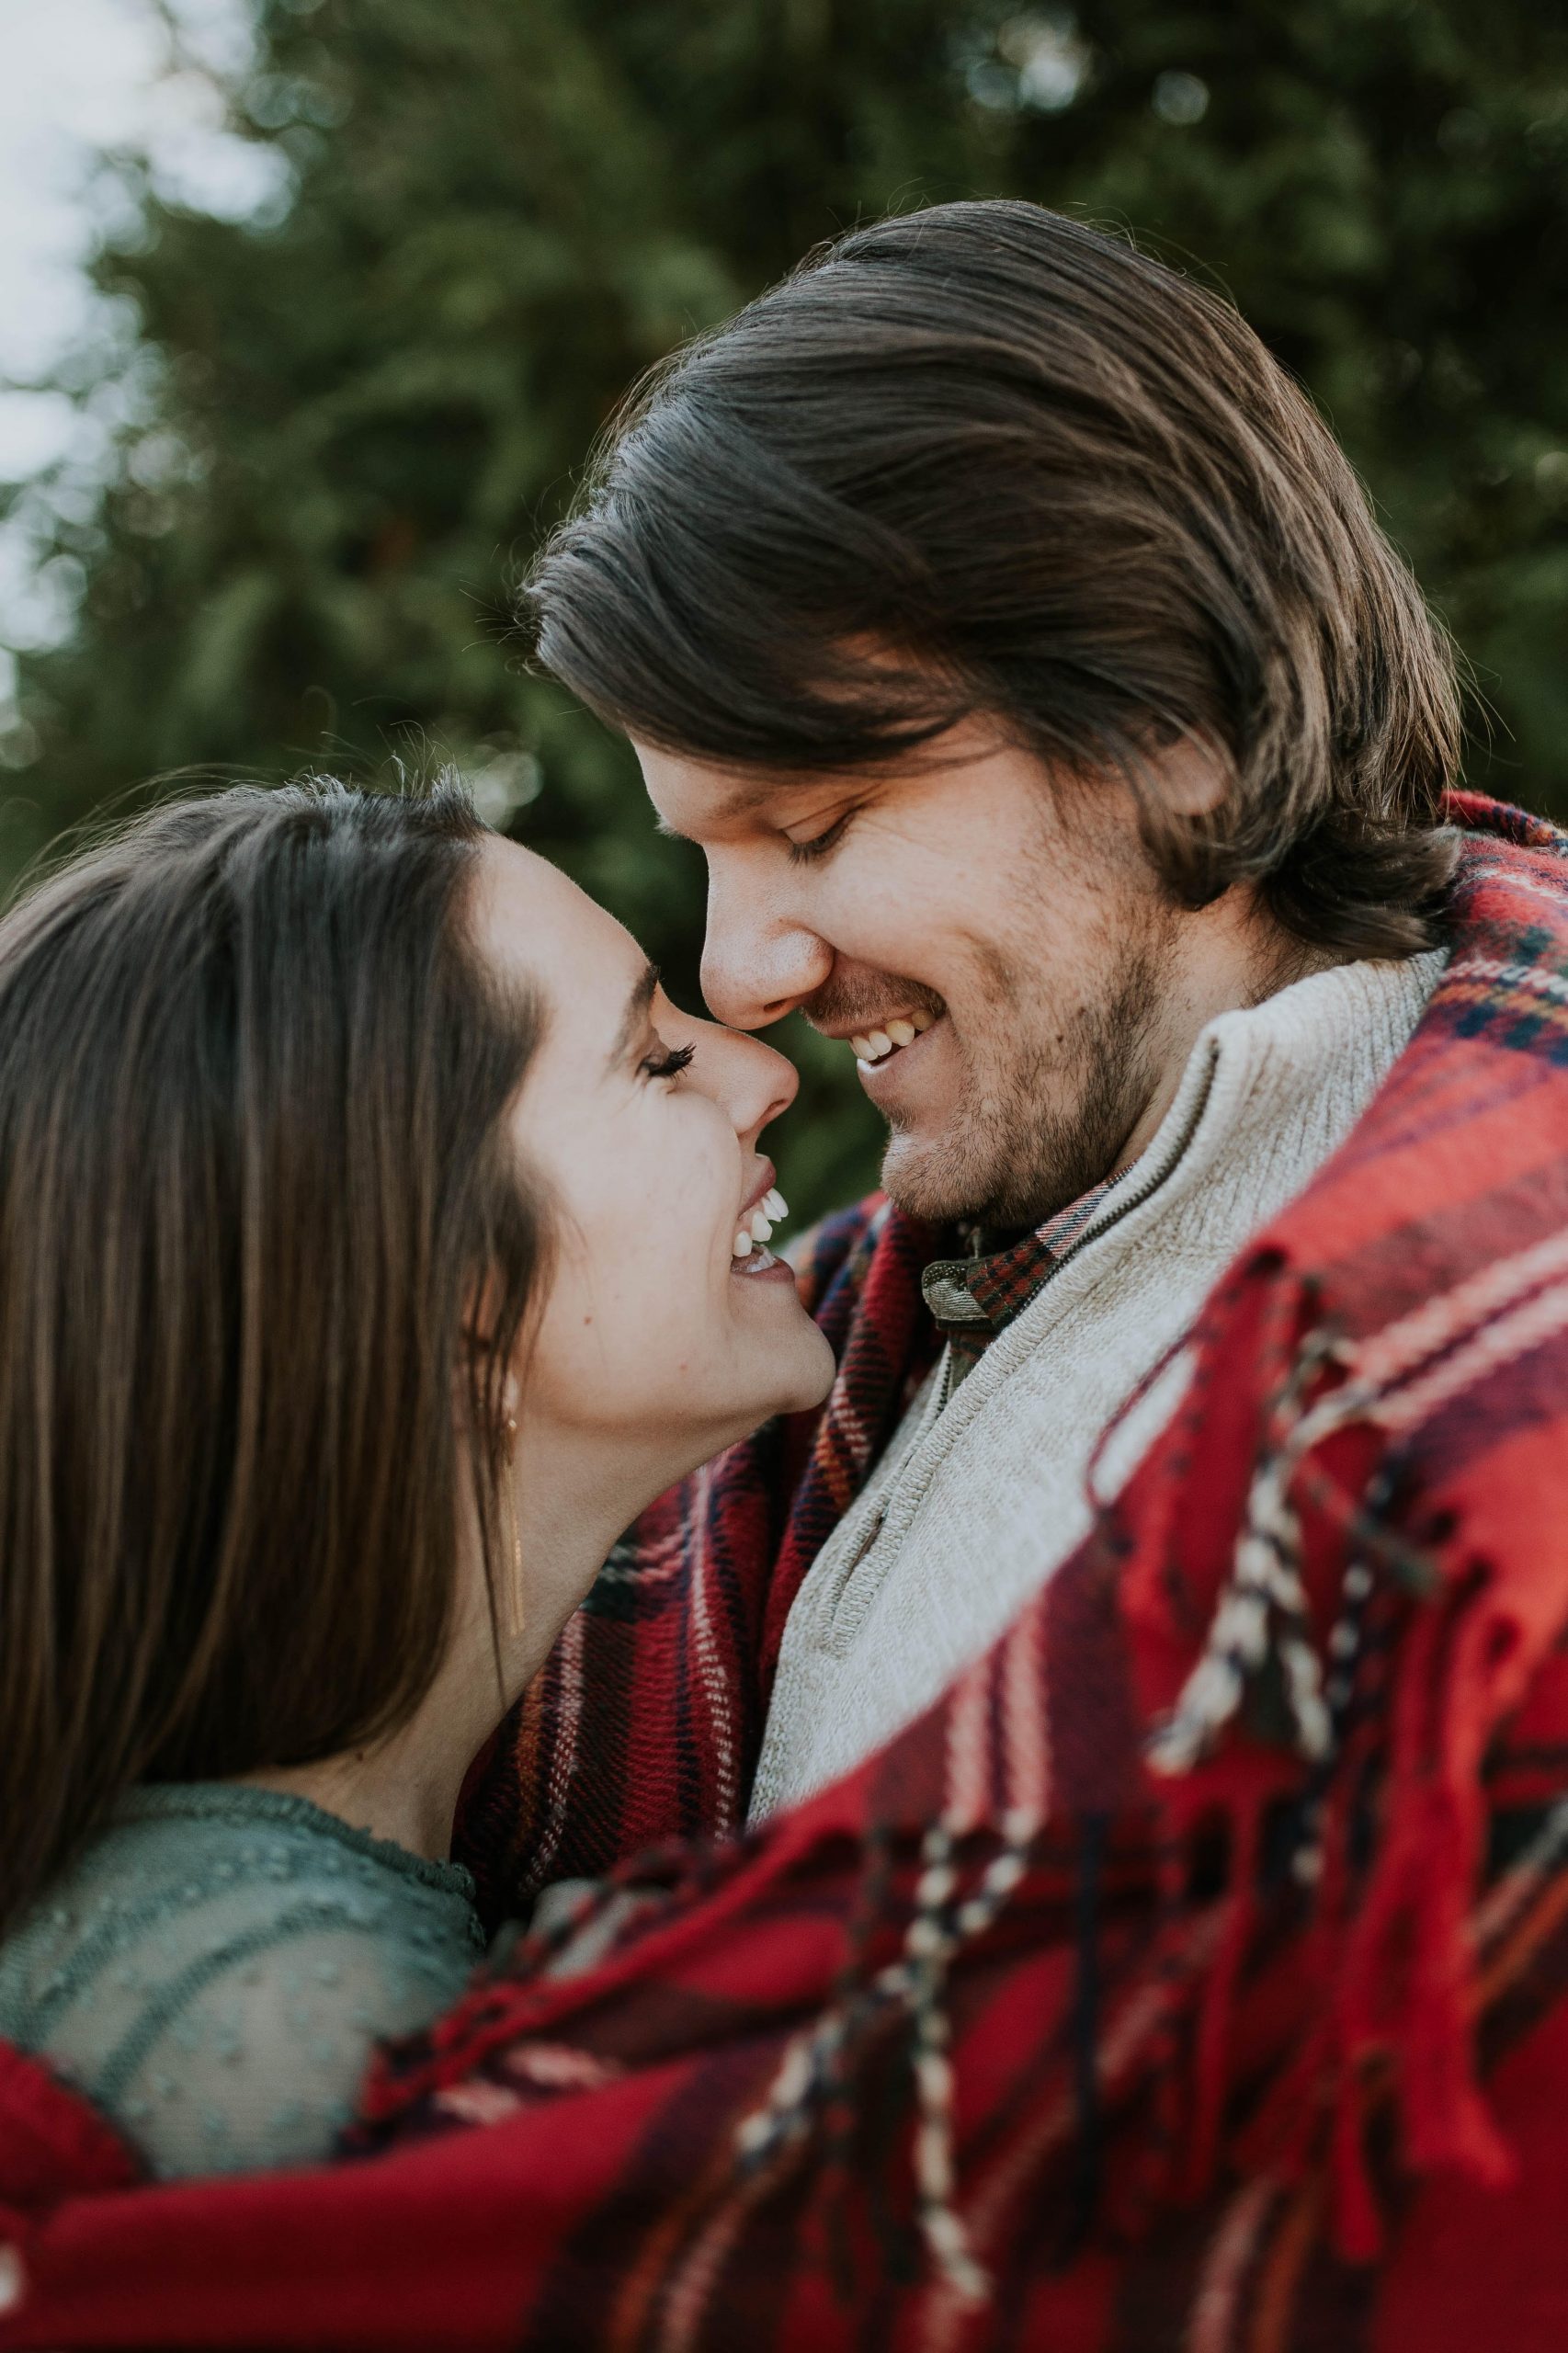 Couple sharing a trusting moment at night, Couple leaning in close, intimacy, trust, how to build trust with your partner blog, relationship, begin counseling in Katy Texas, Fulshear Texas, Richmond Texas